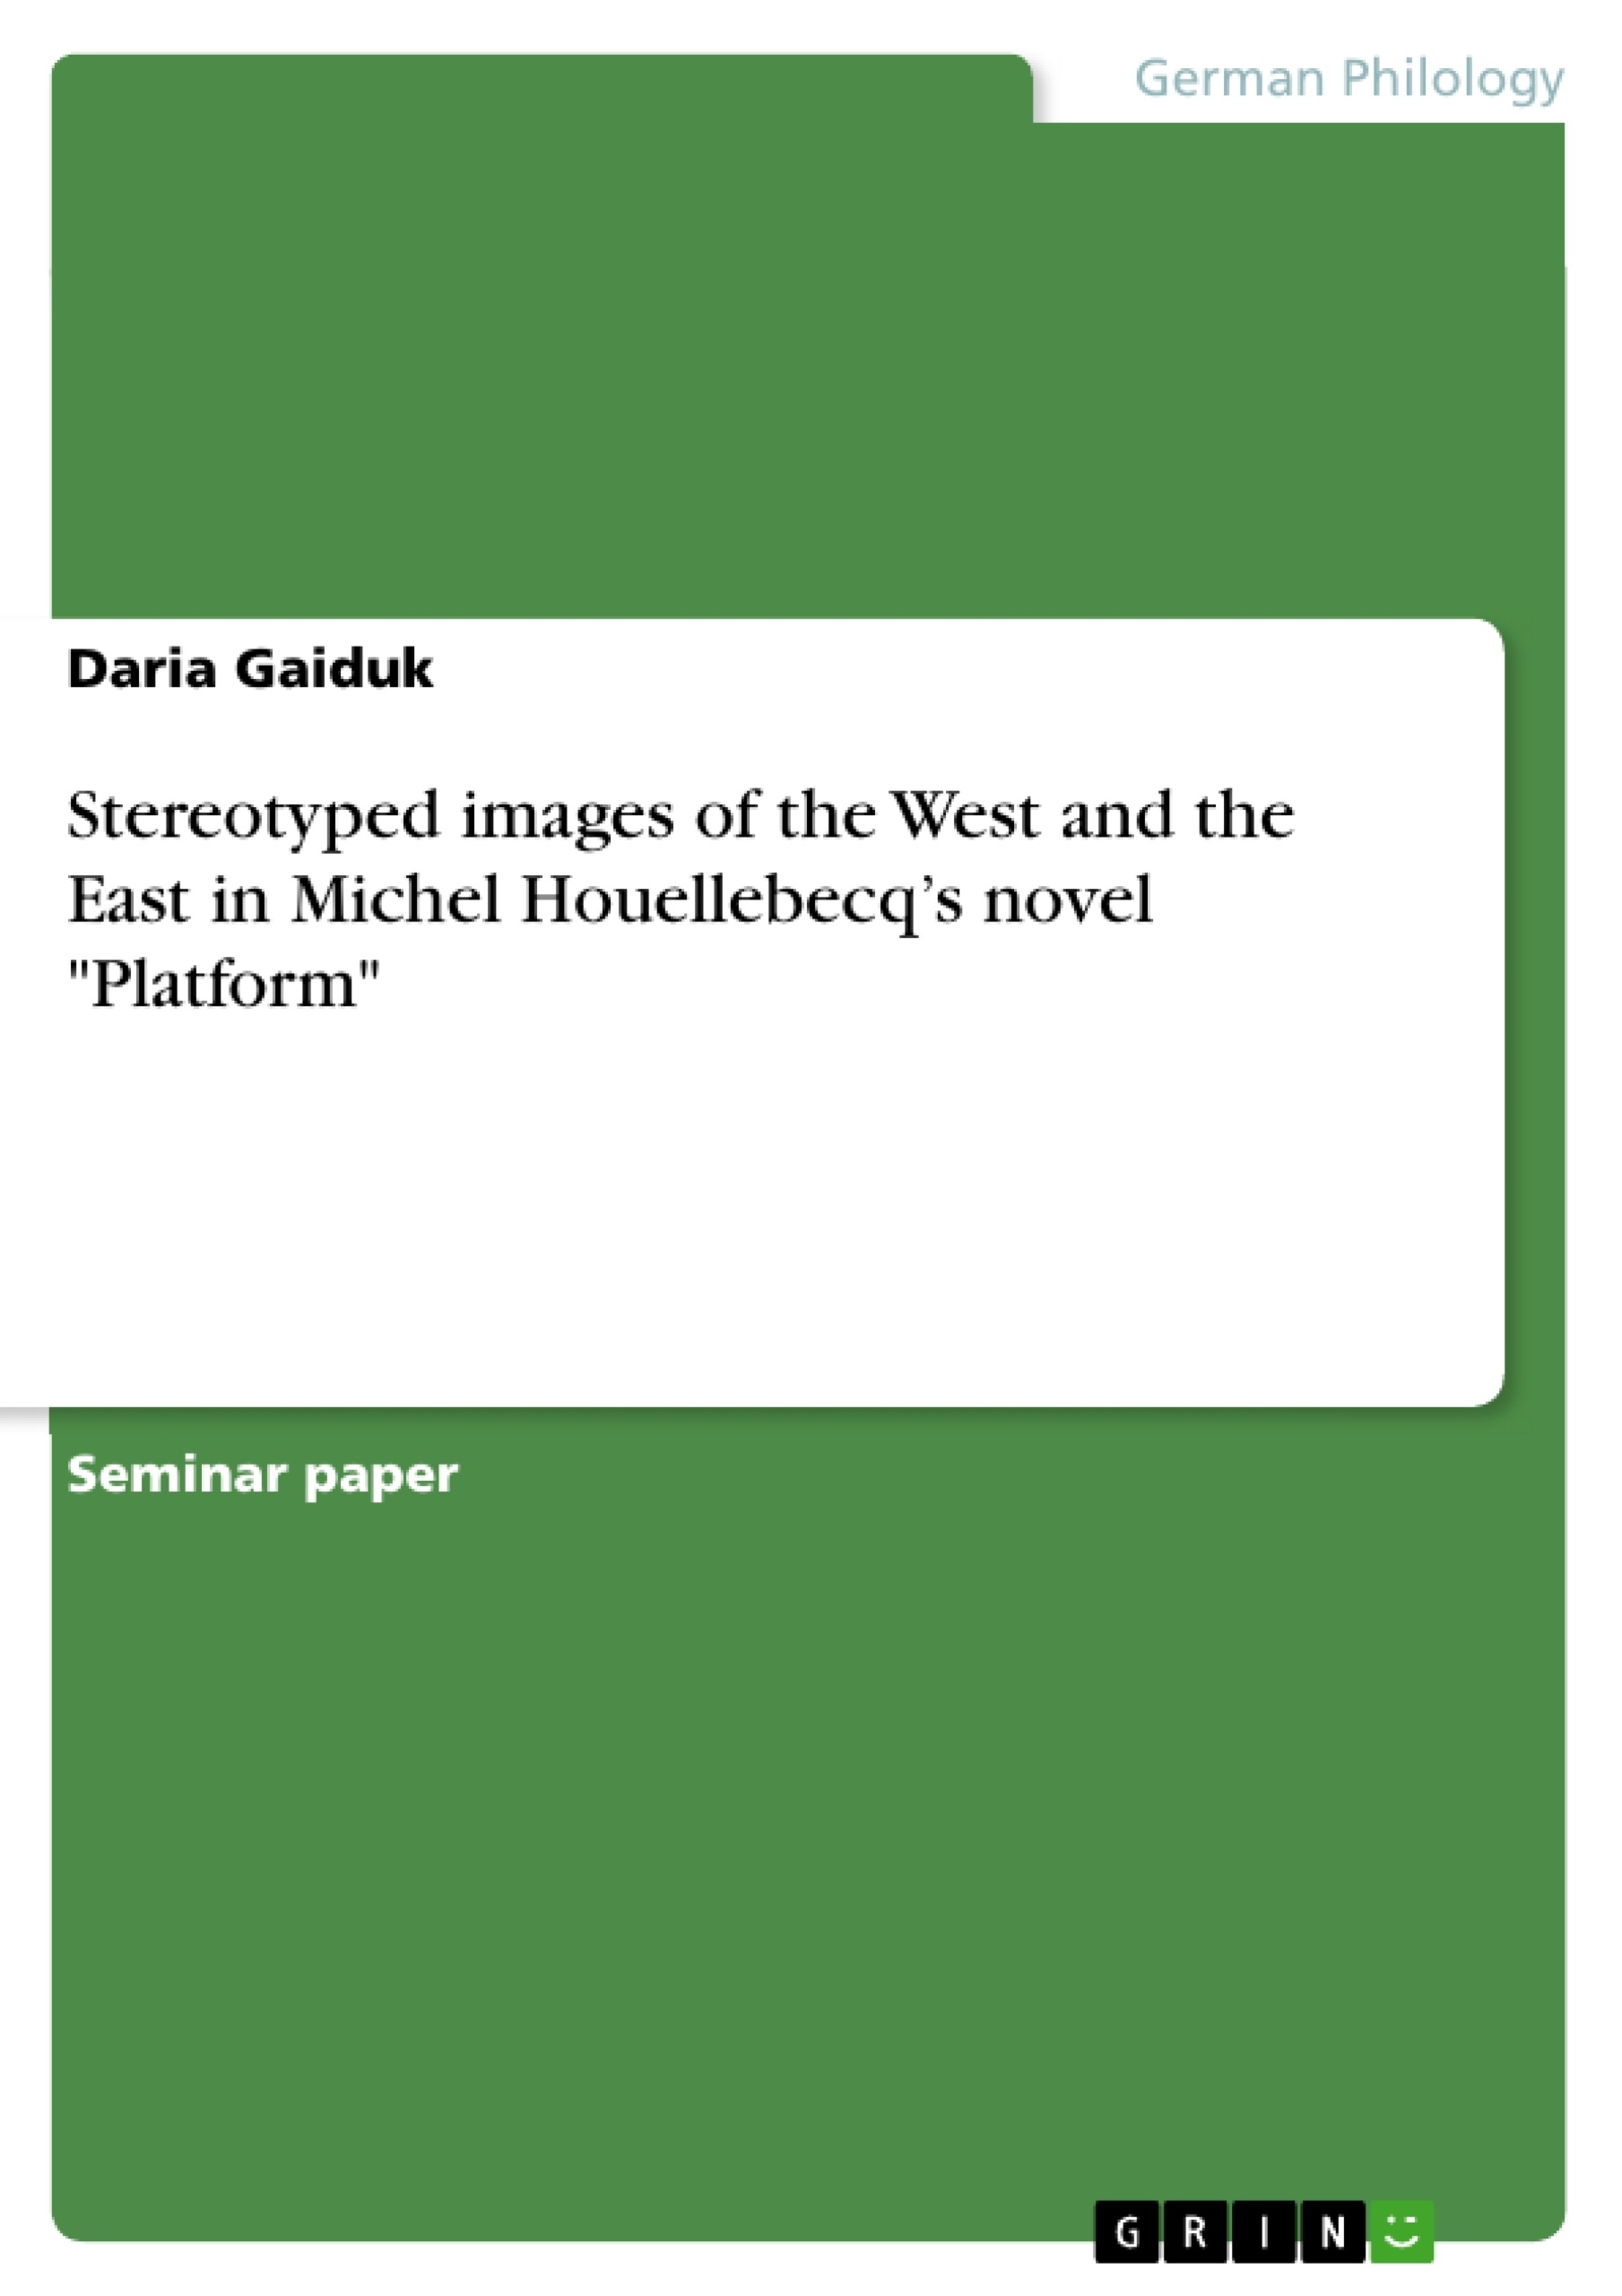 Titel: Stereotyped images of the West and the East  in Michel Houellebecq’s novel "Platform"